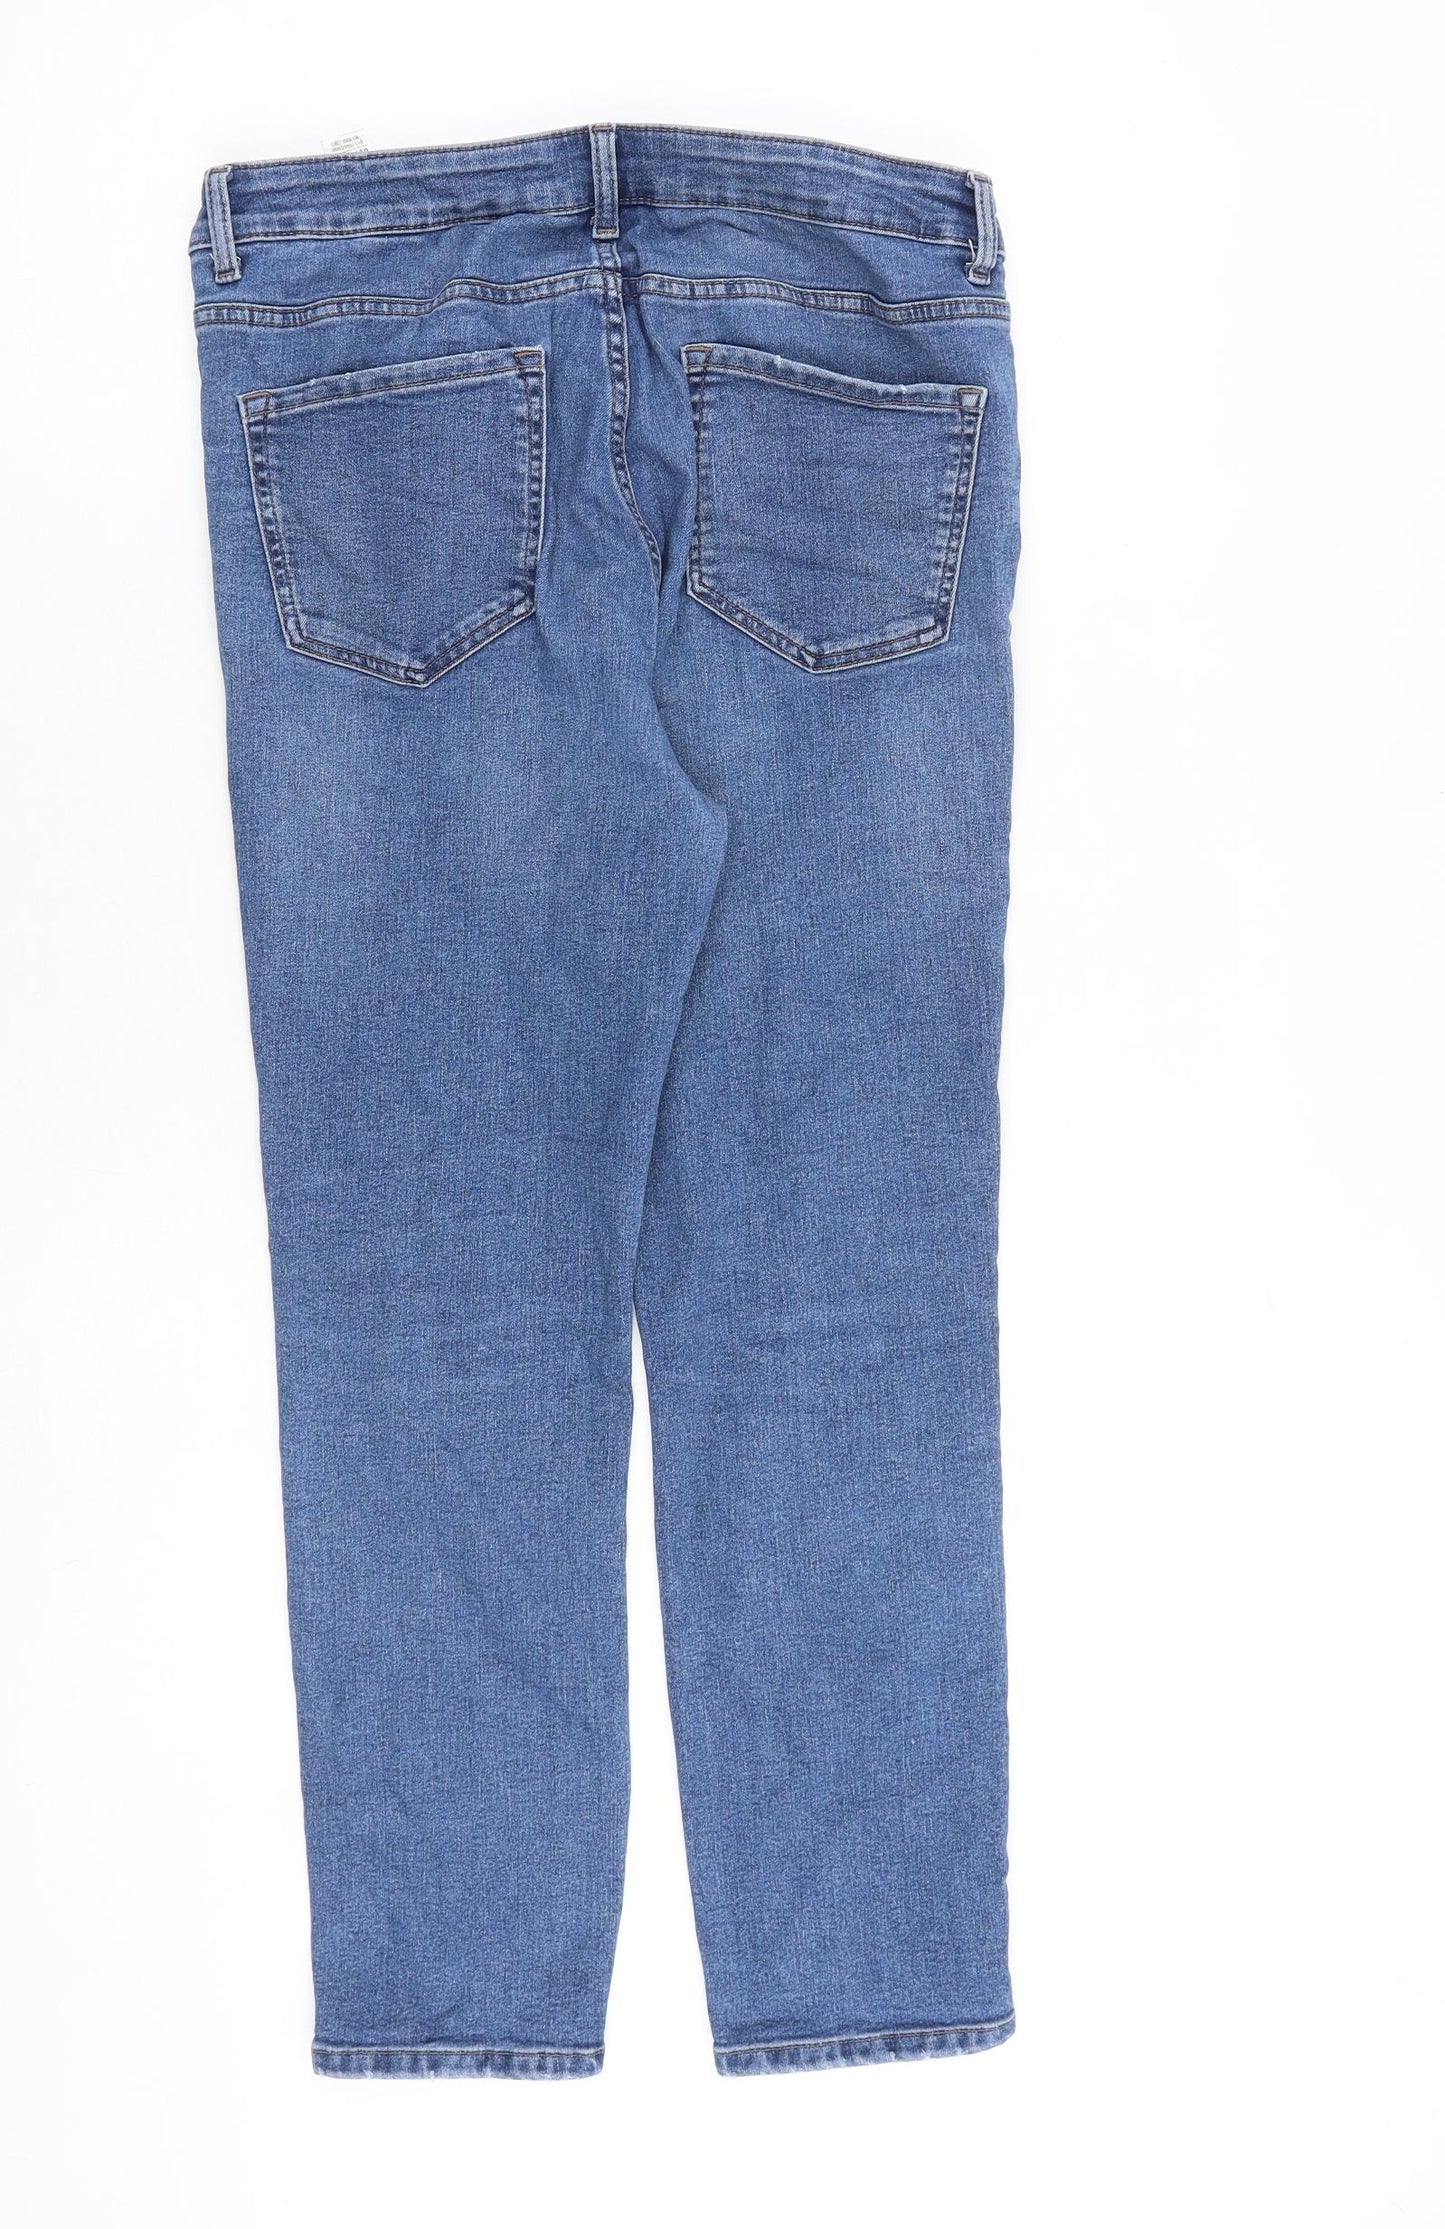 Marks and Spencer Womens Blue Cotton Skinny Jeans Size 12 L26 in Regular Zip